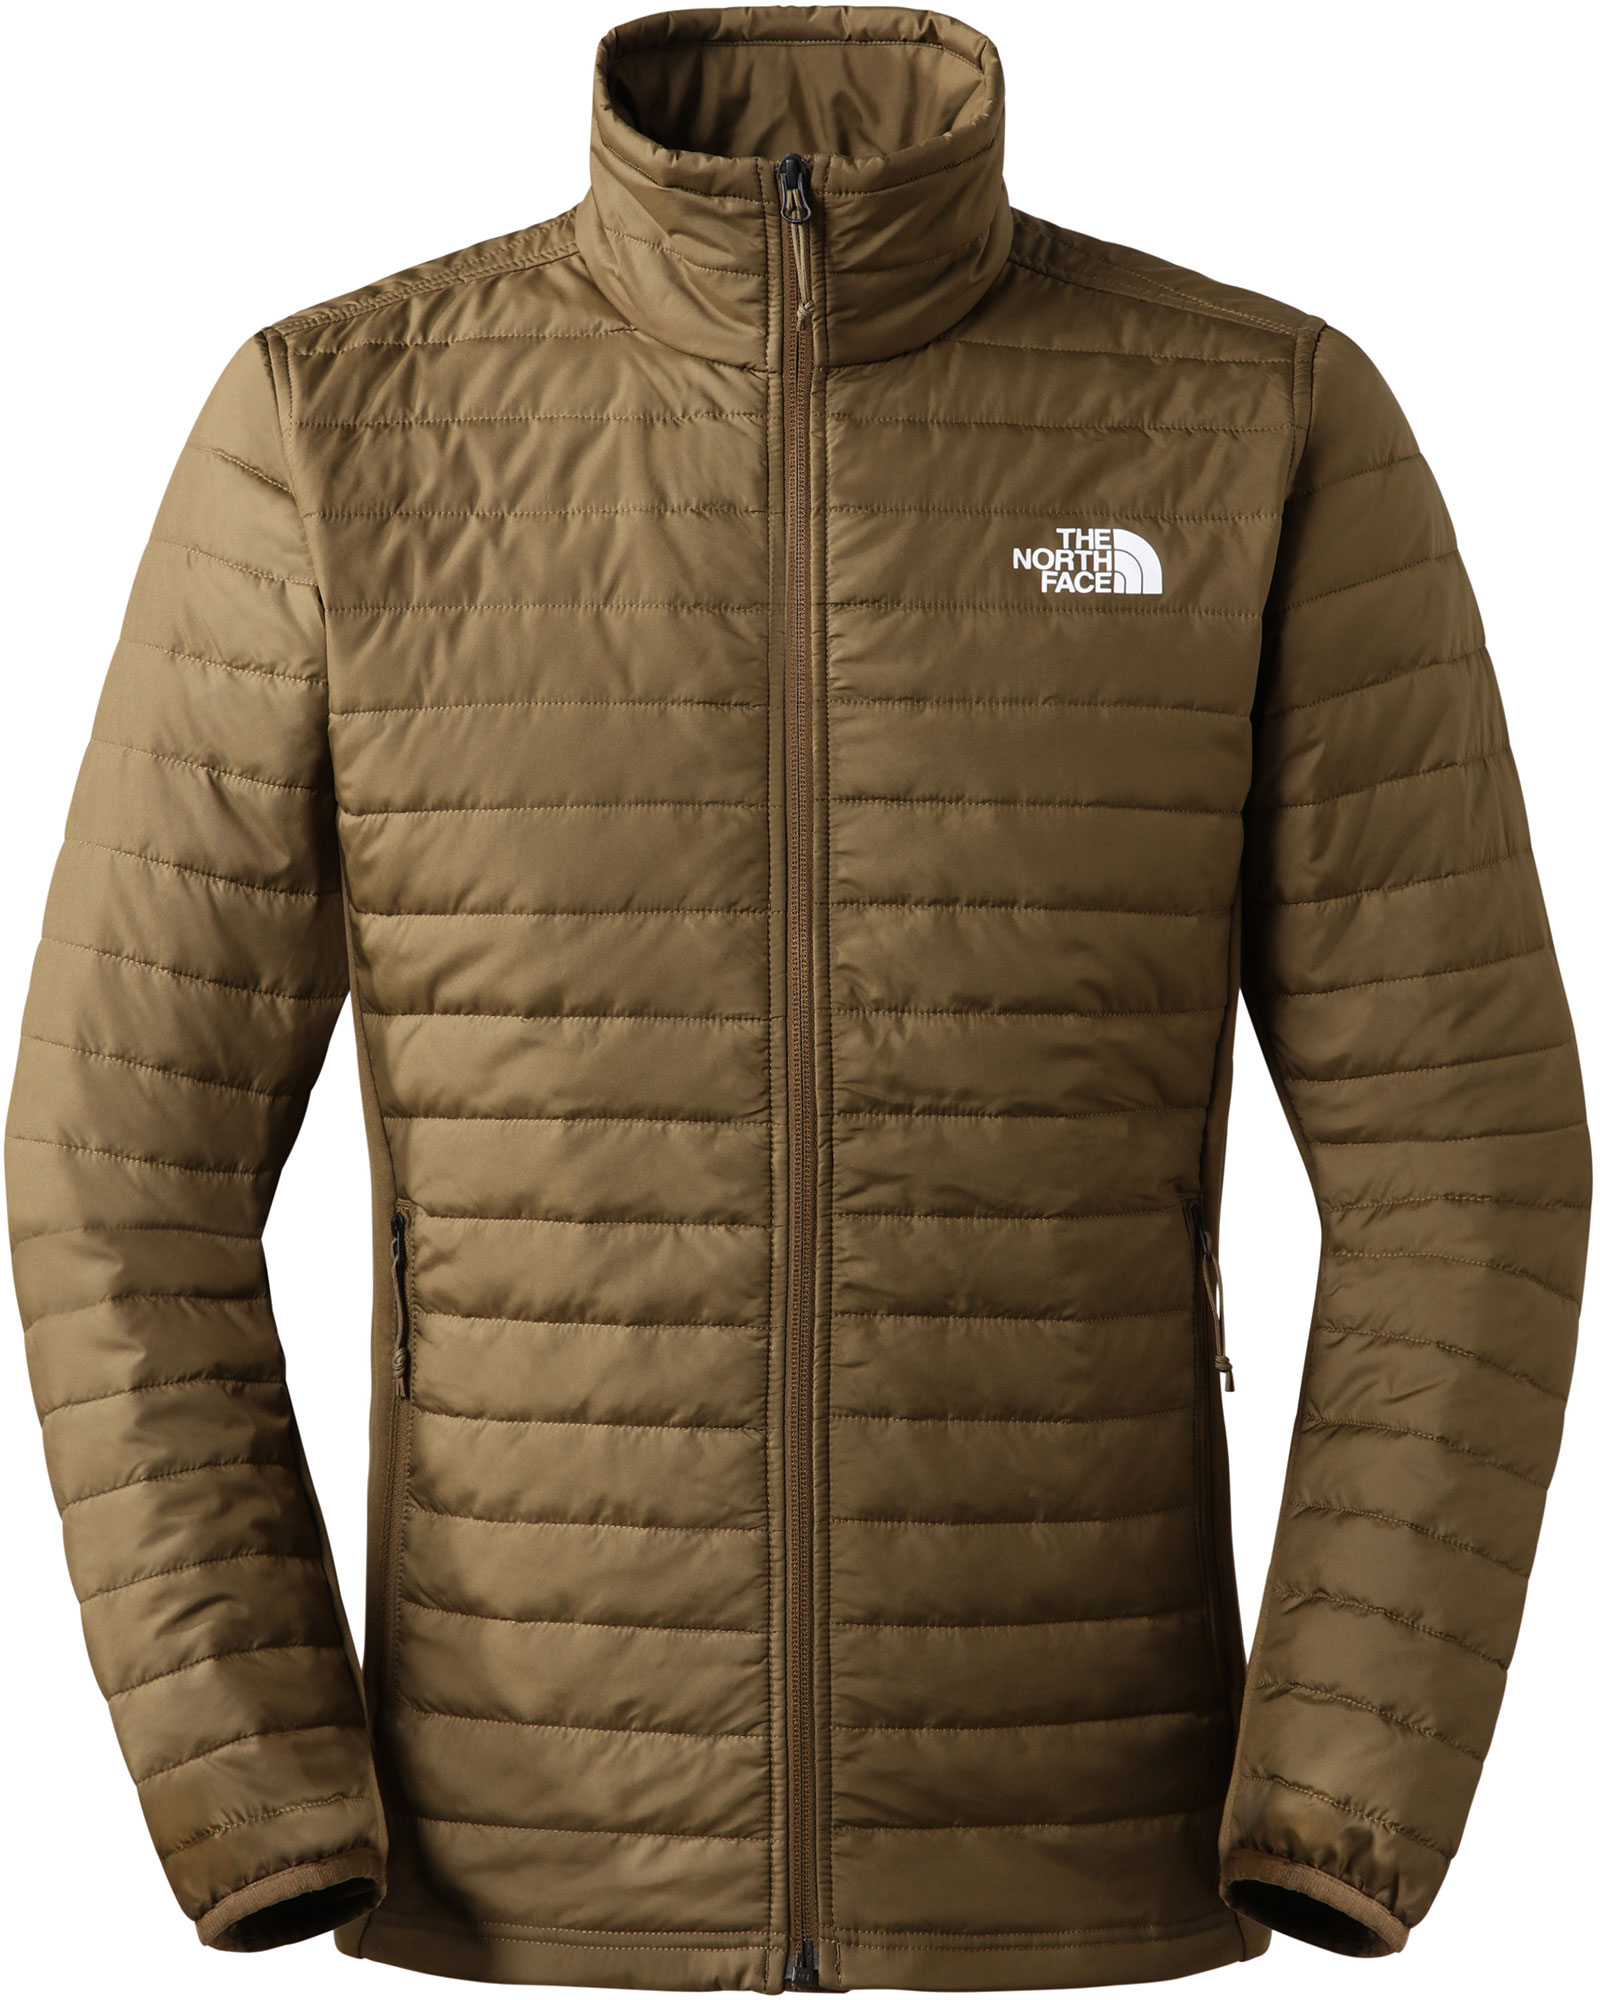 The North Face Canyonlands Hybrid Men’s Insulated Jacket - Military Olive S